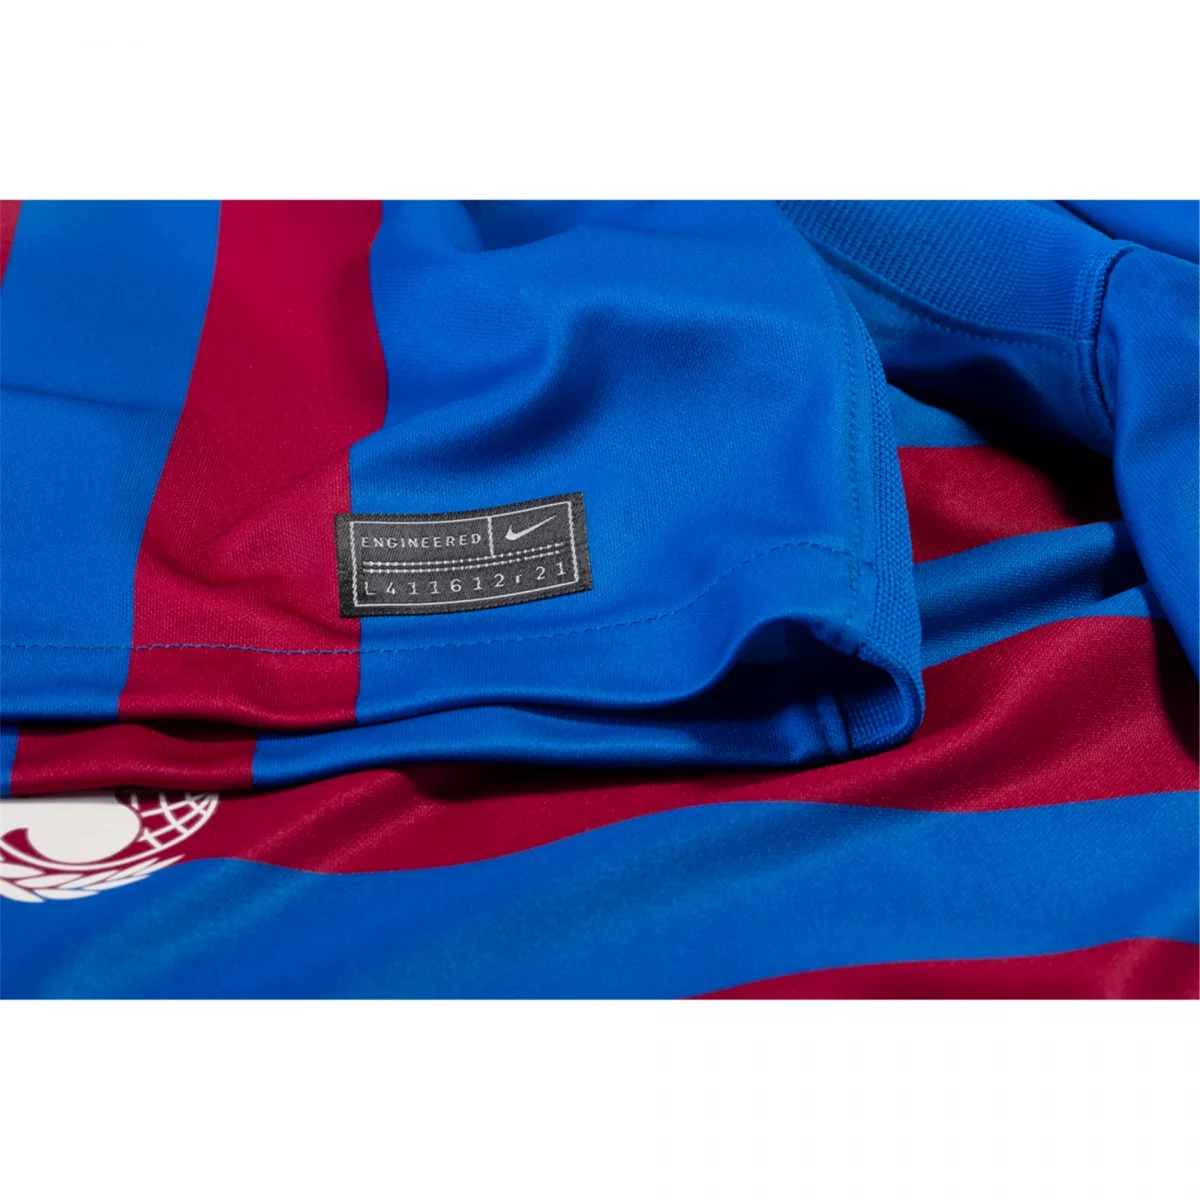 Barcelona 21/22 Home Jersey by Nike – Arena Jerseys